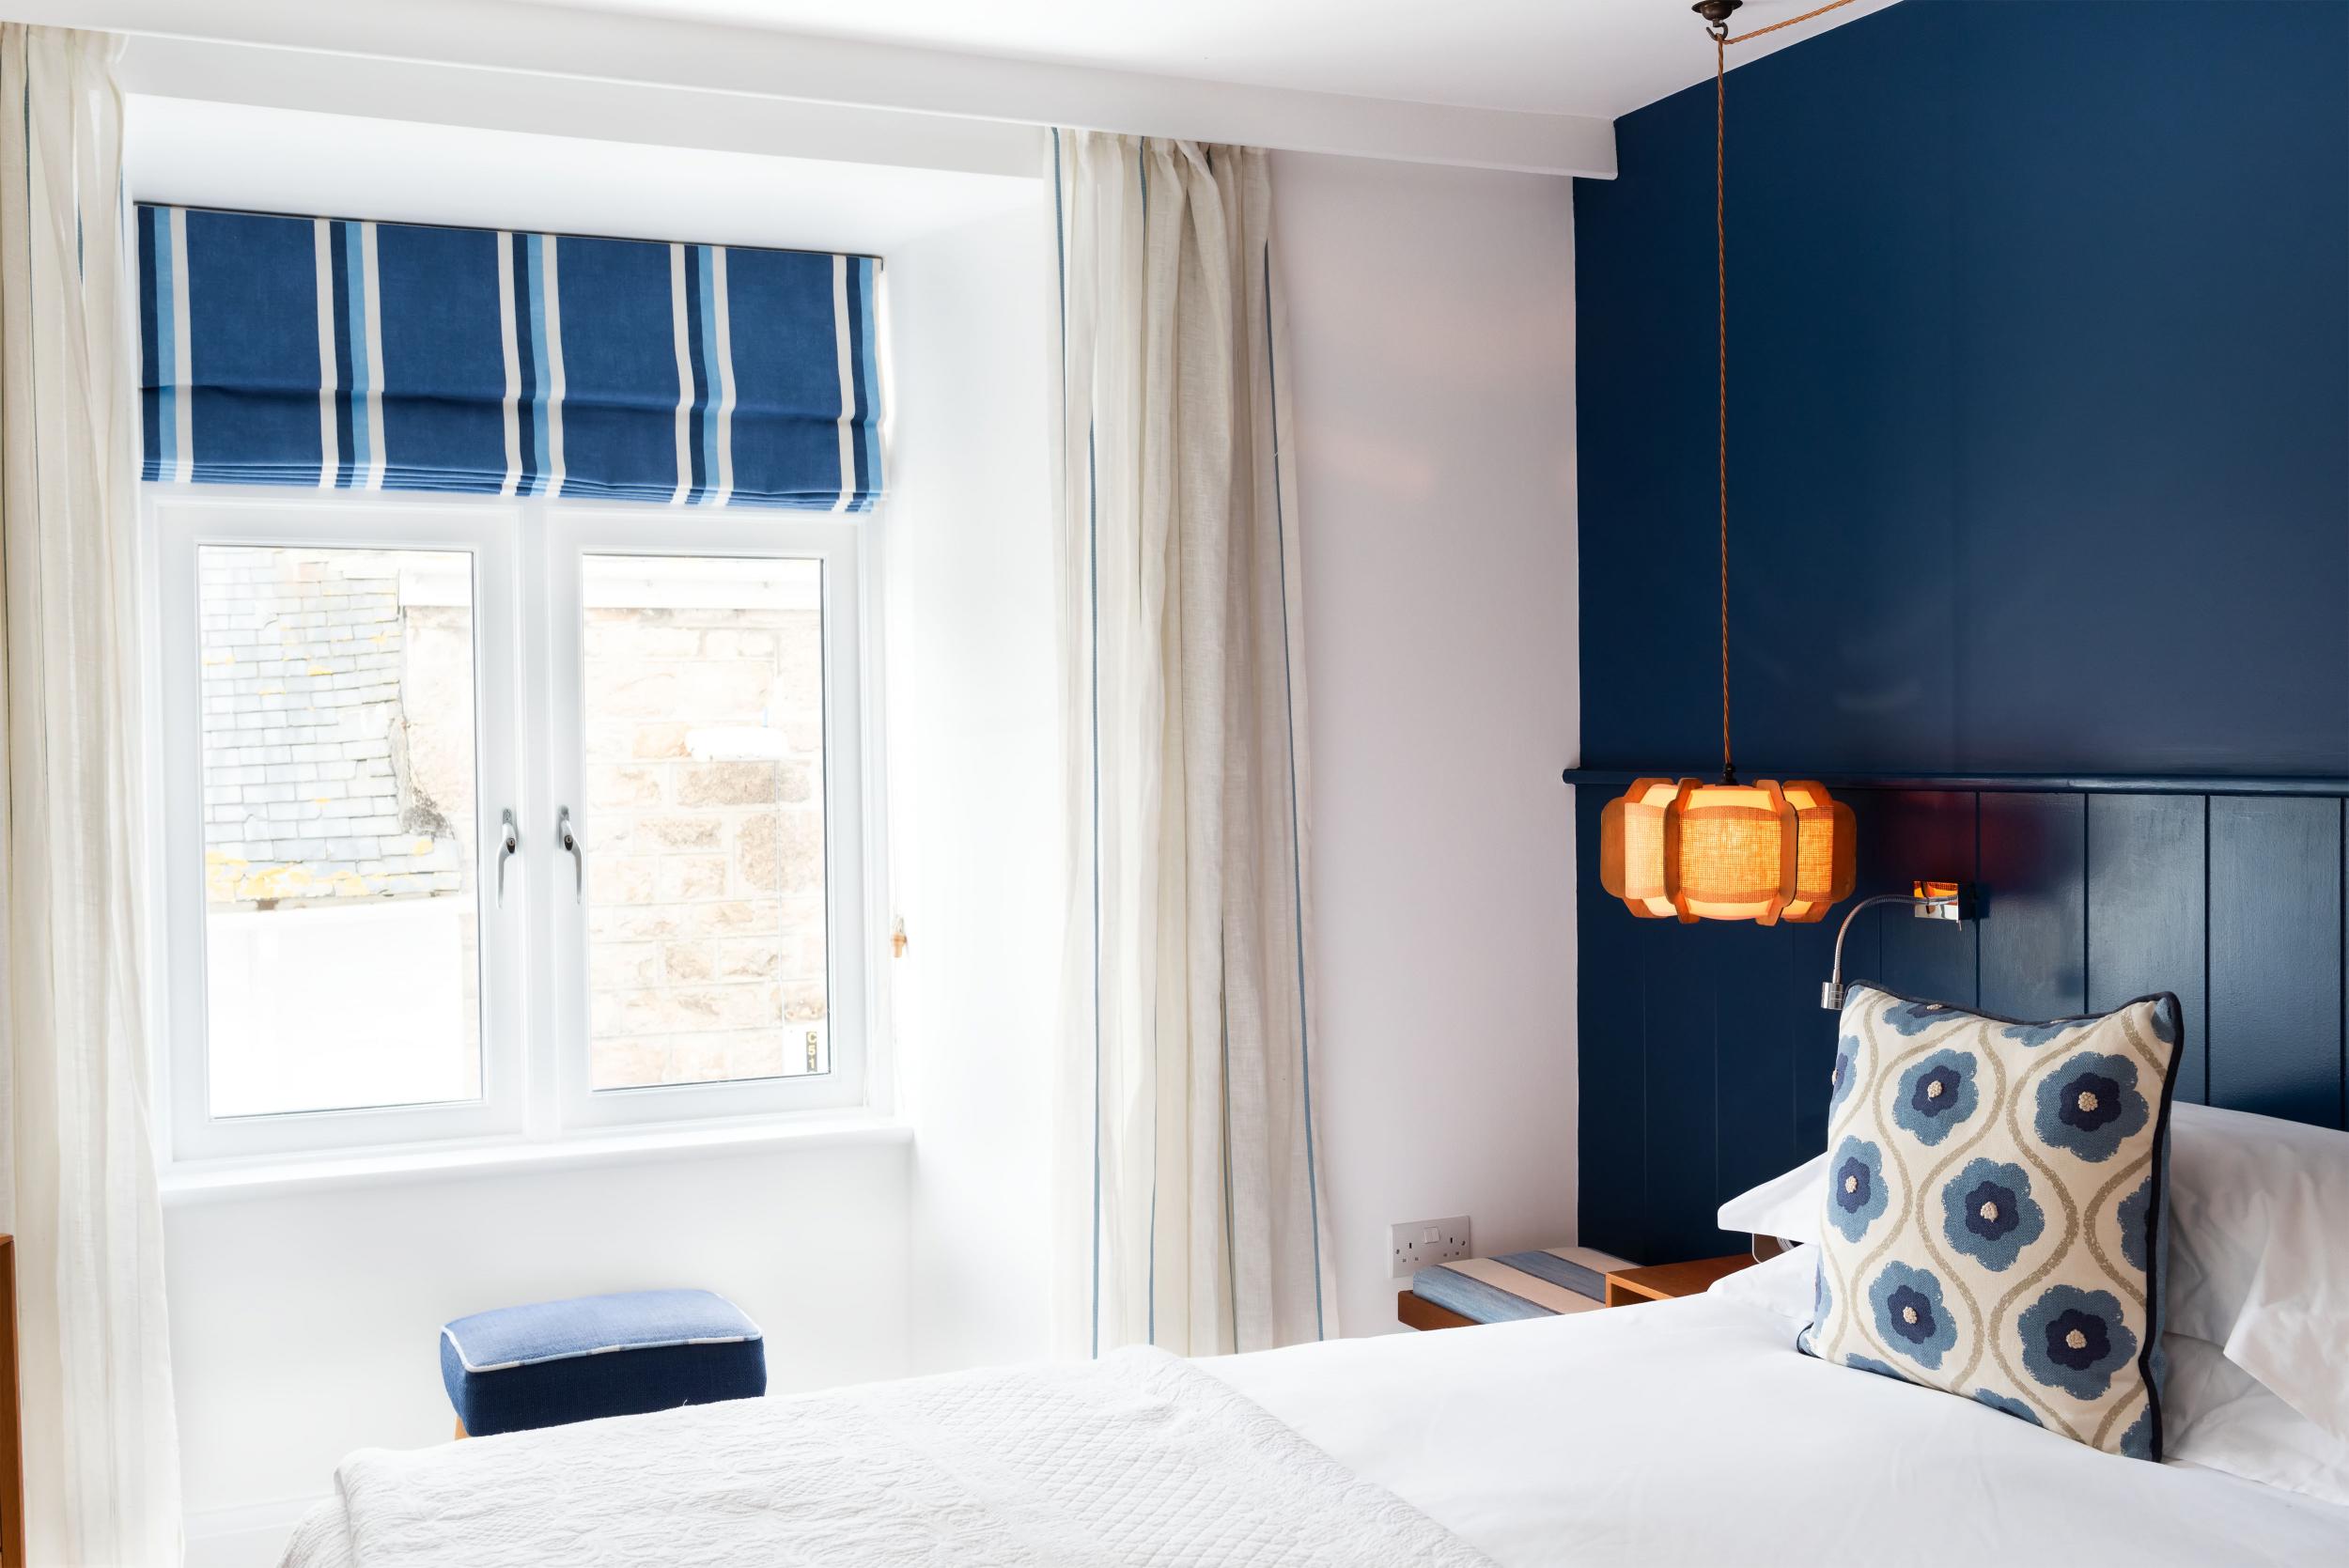 Relax in the clean, crisp interior of the Trevose House Hotel